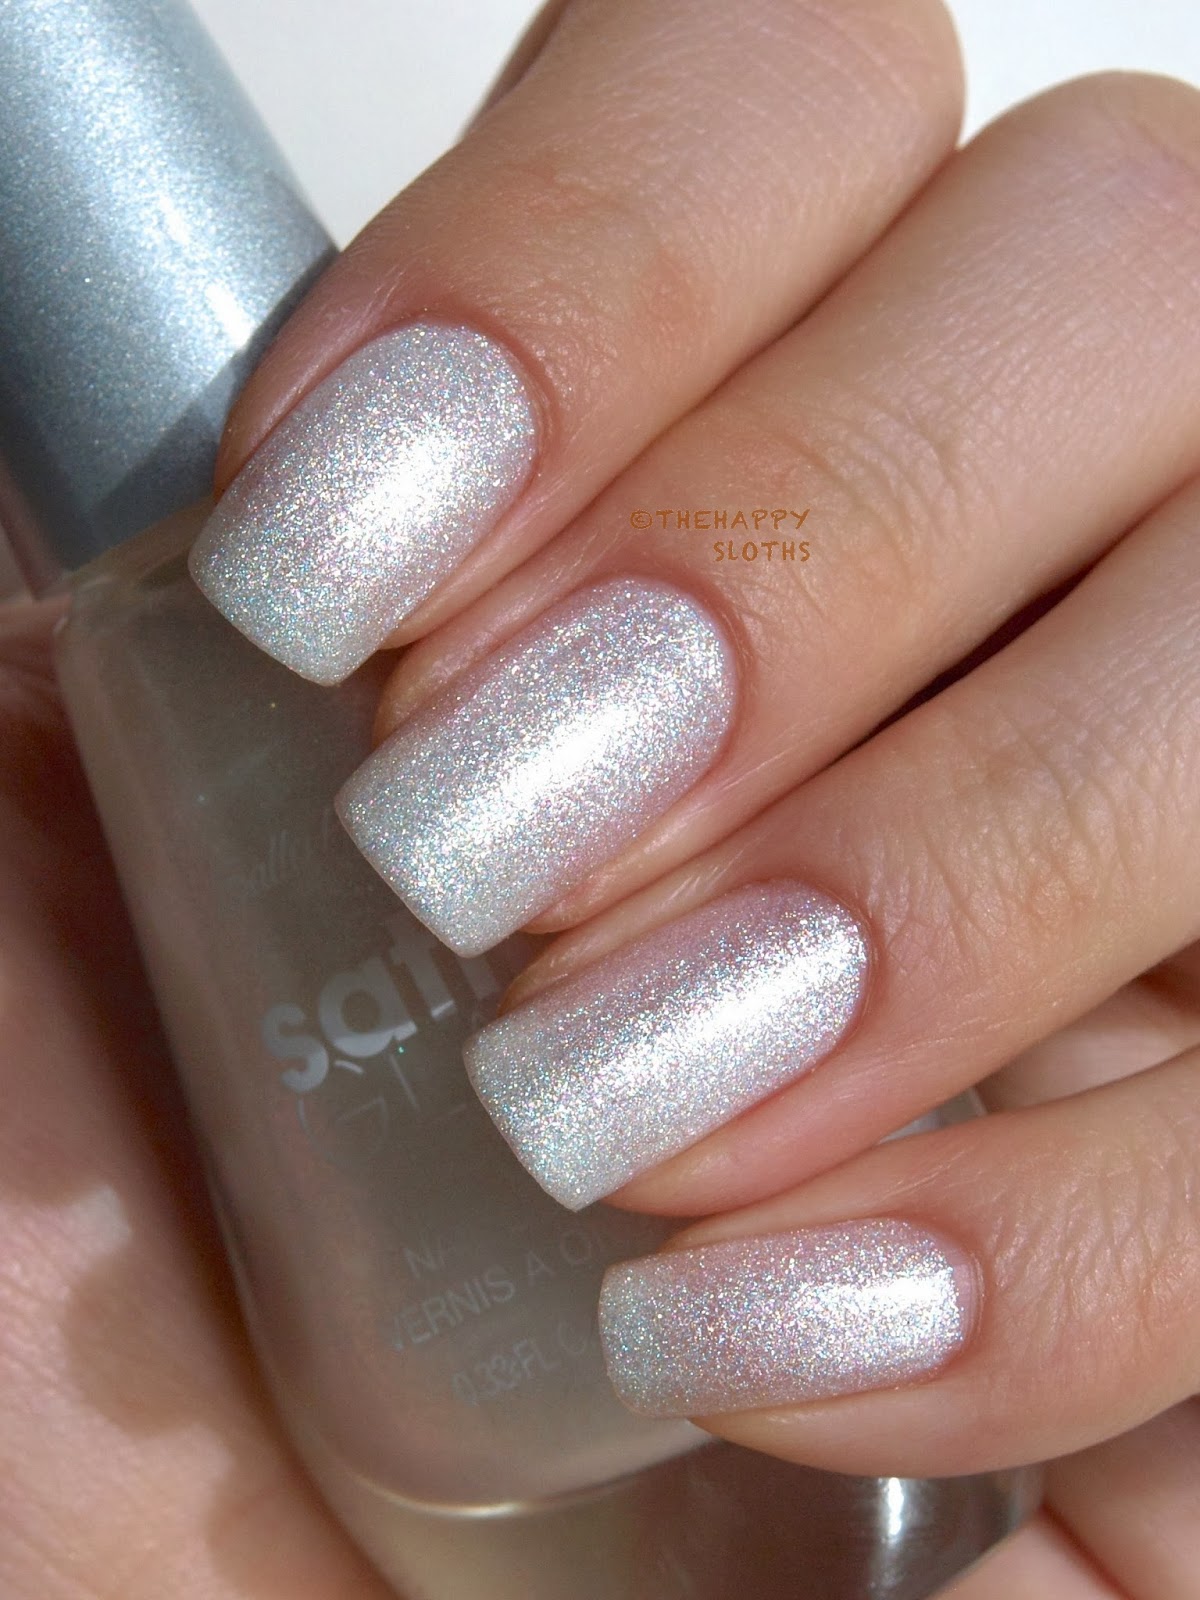 Sally Hansen Glam Nail Polish in "Crystalline": & Swatches | The Happy Sloths: Makeup, and Skincare Blog with Reviews and